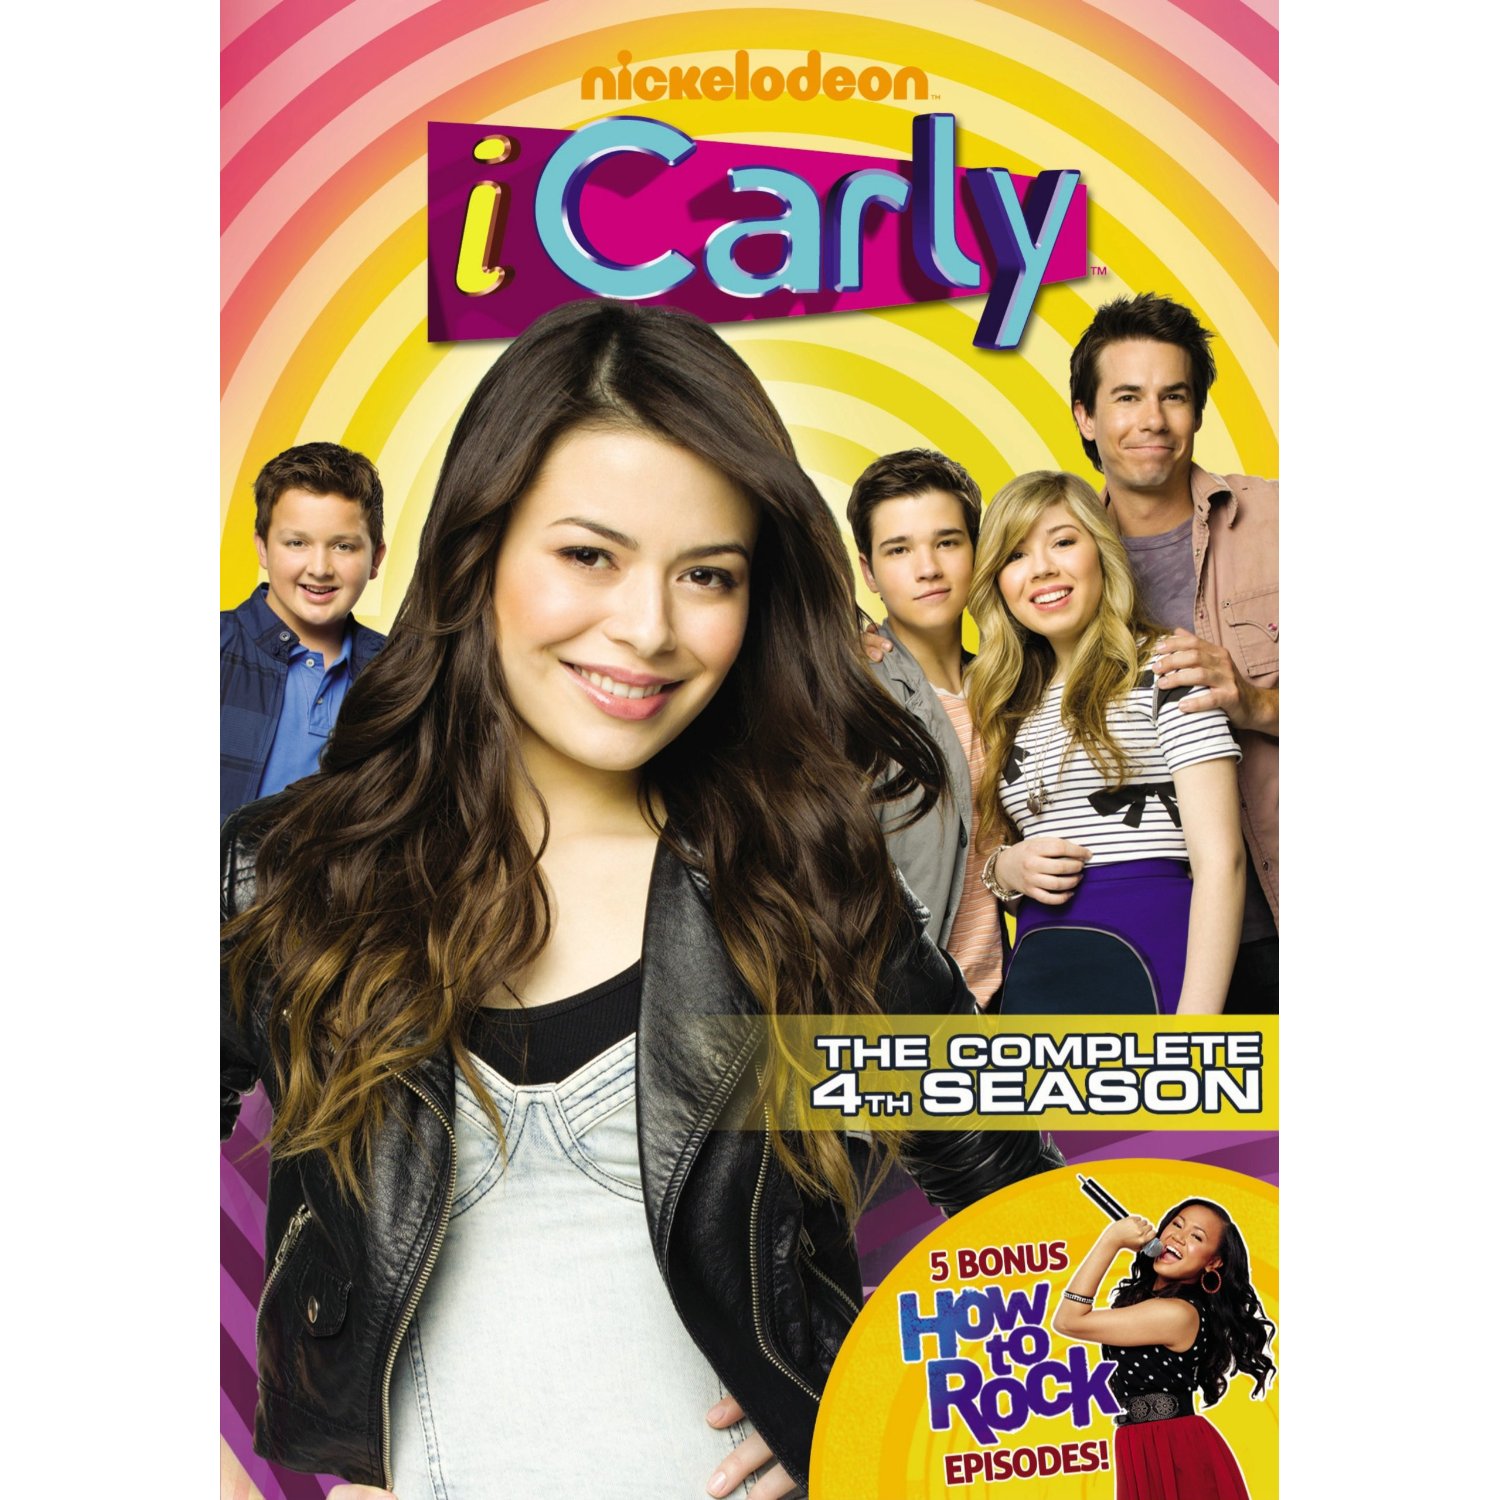 iCarly: The Complete 4th Season DVD Review - ToBeThode